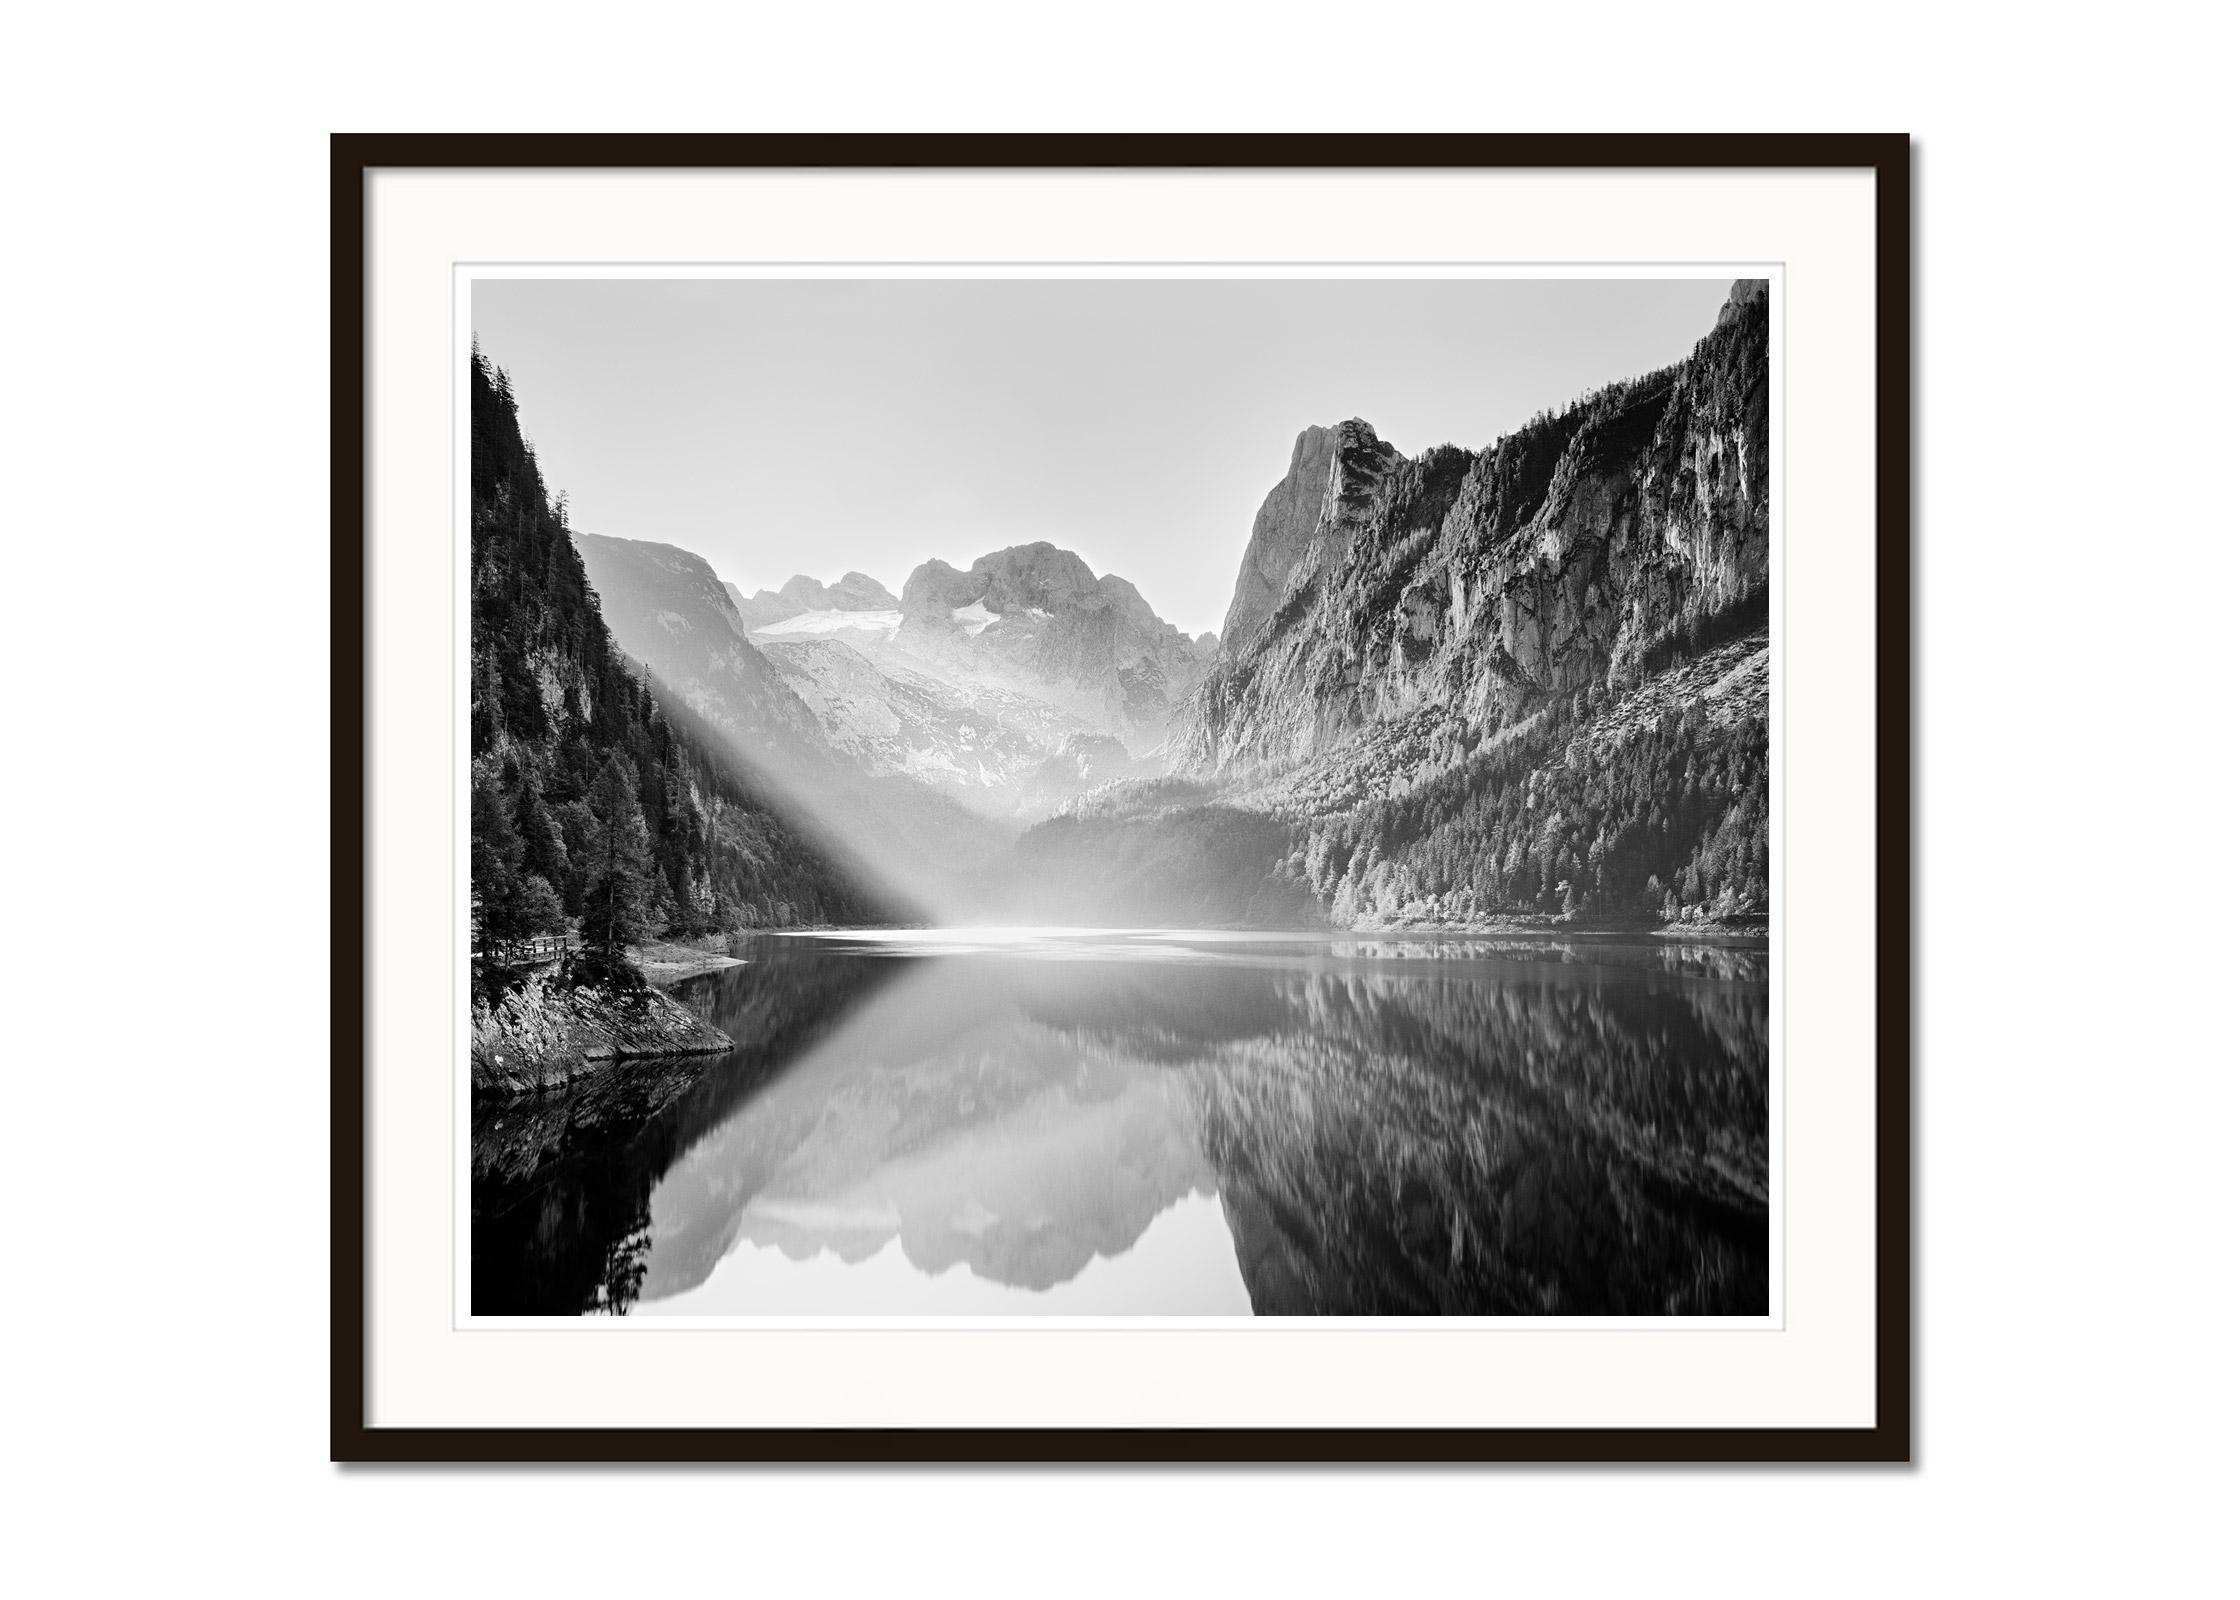 Illumination, mountain lake, black and white long exposure landscape photography - Gray Landscape Photograph by Gerald Berghammer